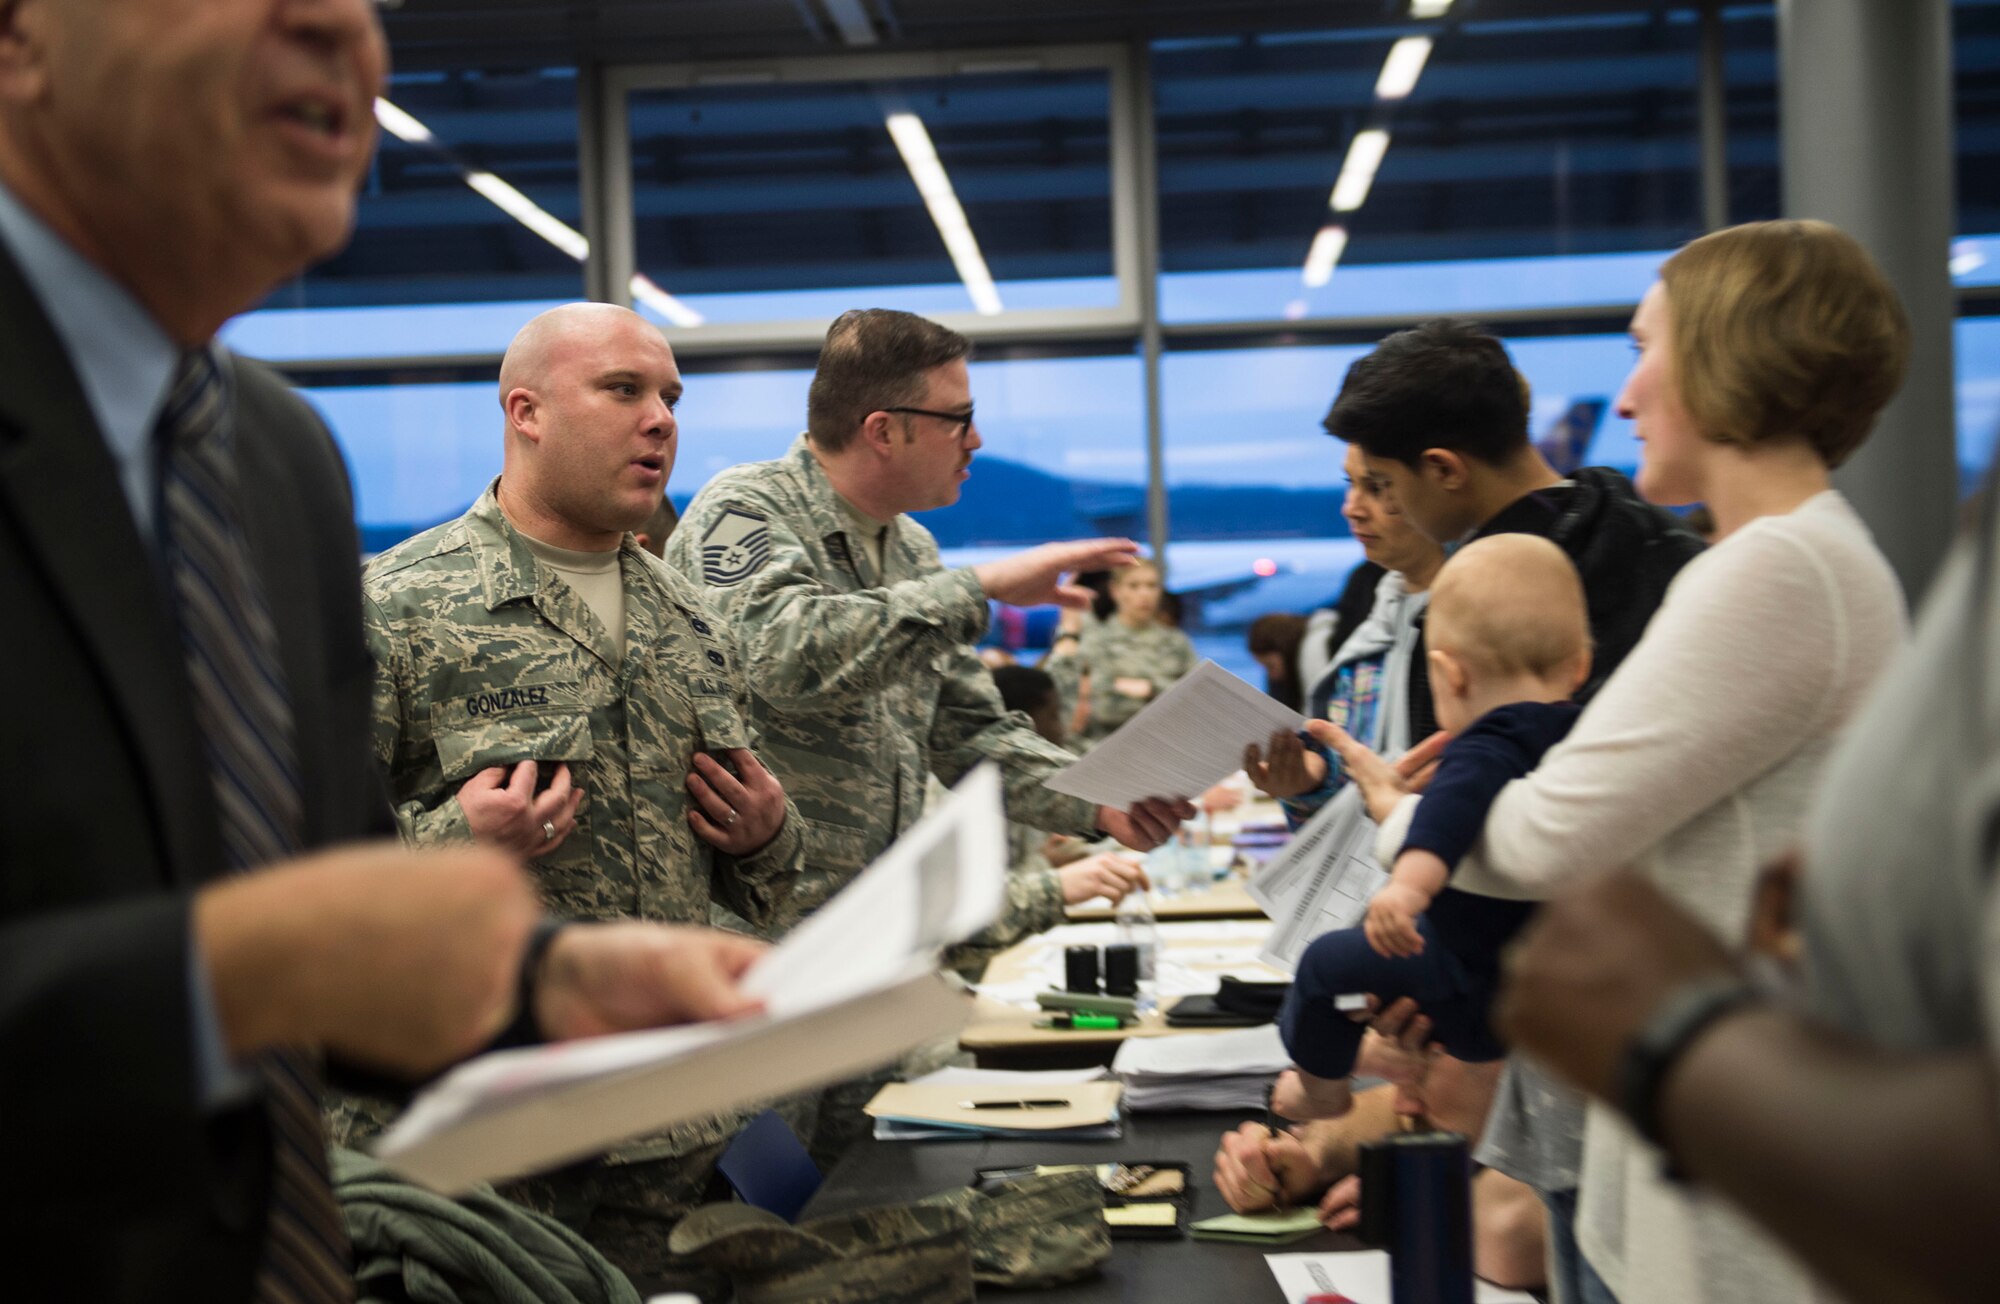 Airmen from the 86th Airlift Wing process families into Ramstein Air Base, Germany, after their departure from Turkey on March 30, 2016. Because of the ongoing threat in the region, dependents of service members were ordered to leave Turkey and Ramstein AB was designated as a “transition location” for families to await travel to their subsequent duty locations. However, a number of families will relocate to Ramstein AB for an extended period of time. (U.S. Air Force photo/Staff Sgt. Sara Keller)